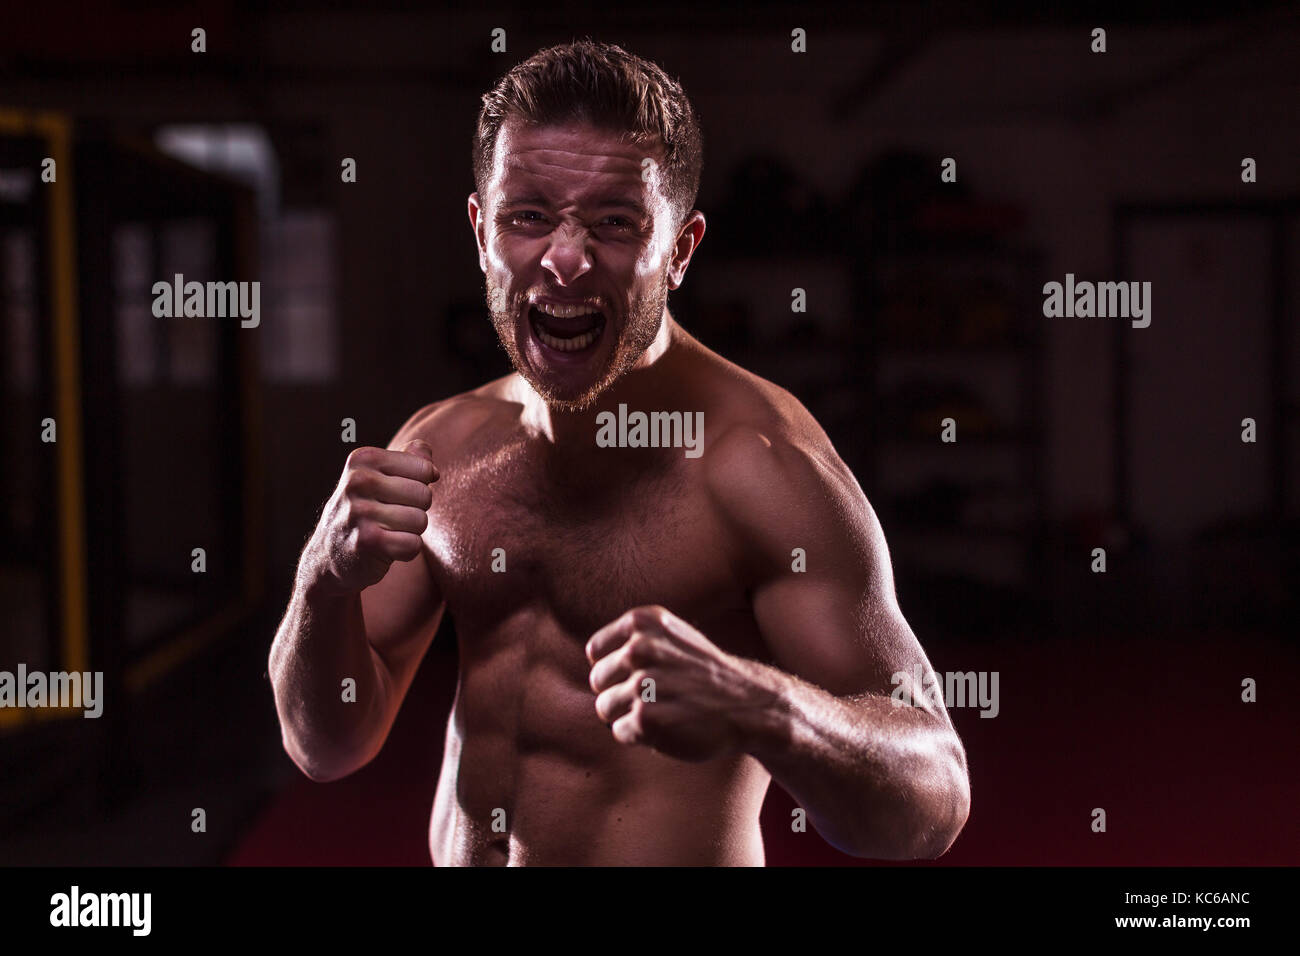 A male MMA fighter training kicks and punches in a dark gym Stock Photo